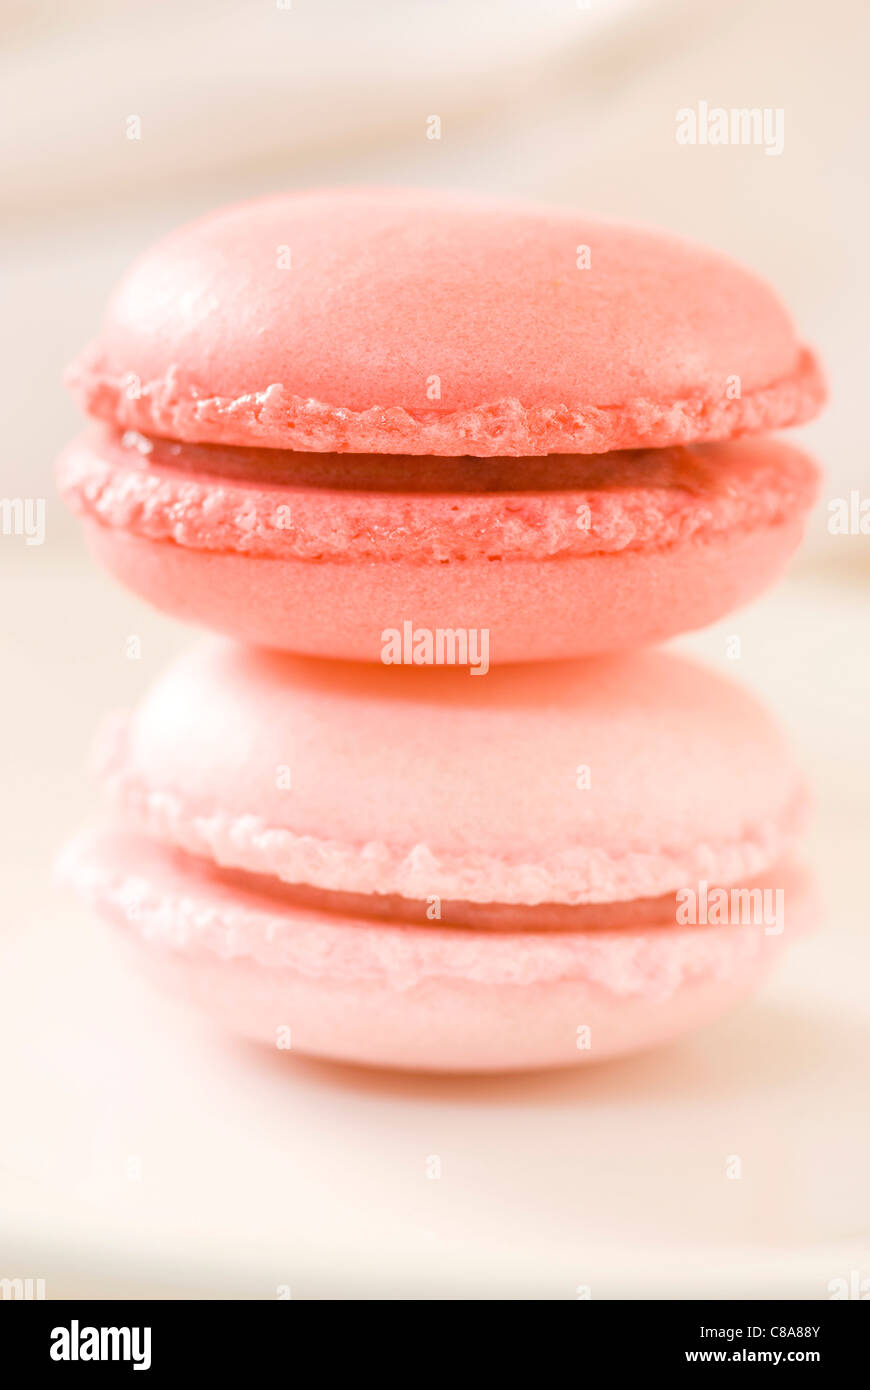 Two rose-flavored macaroons Stock Photo